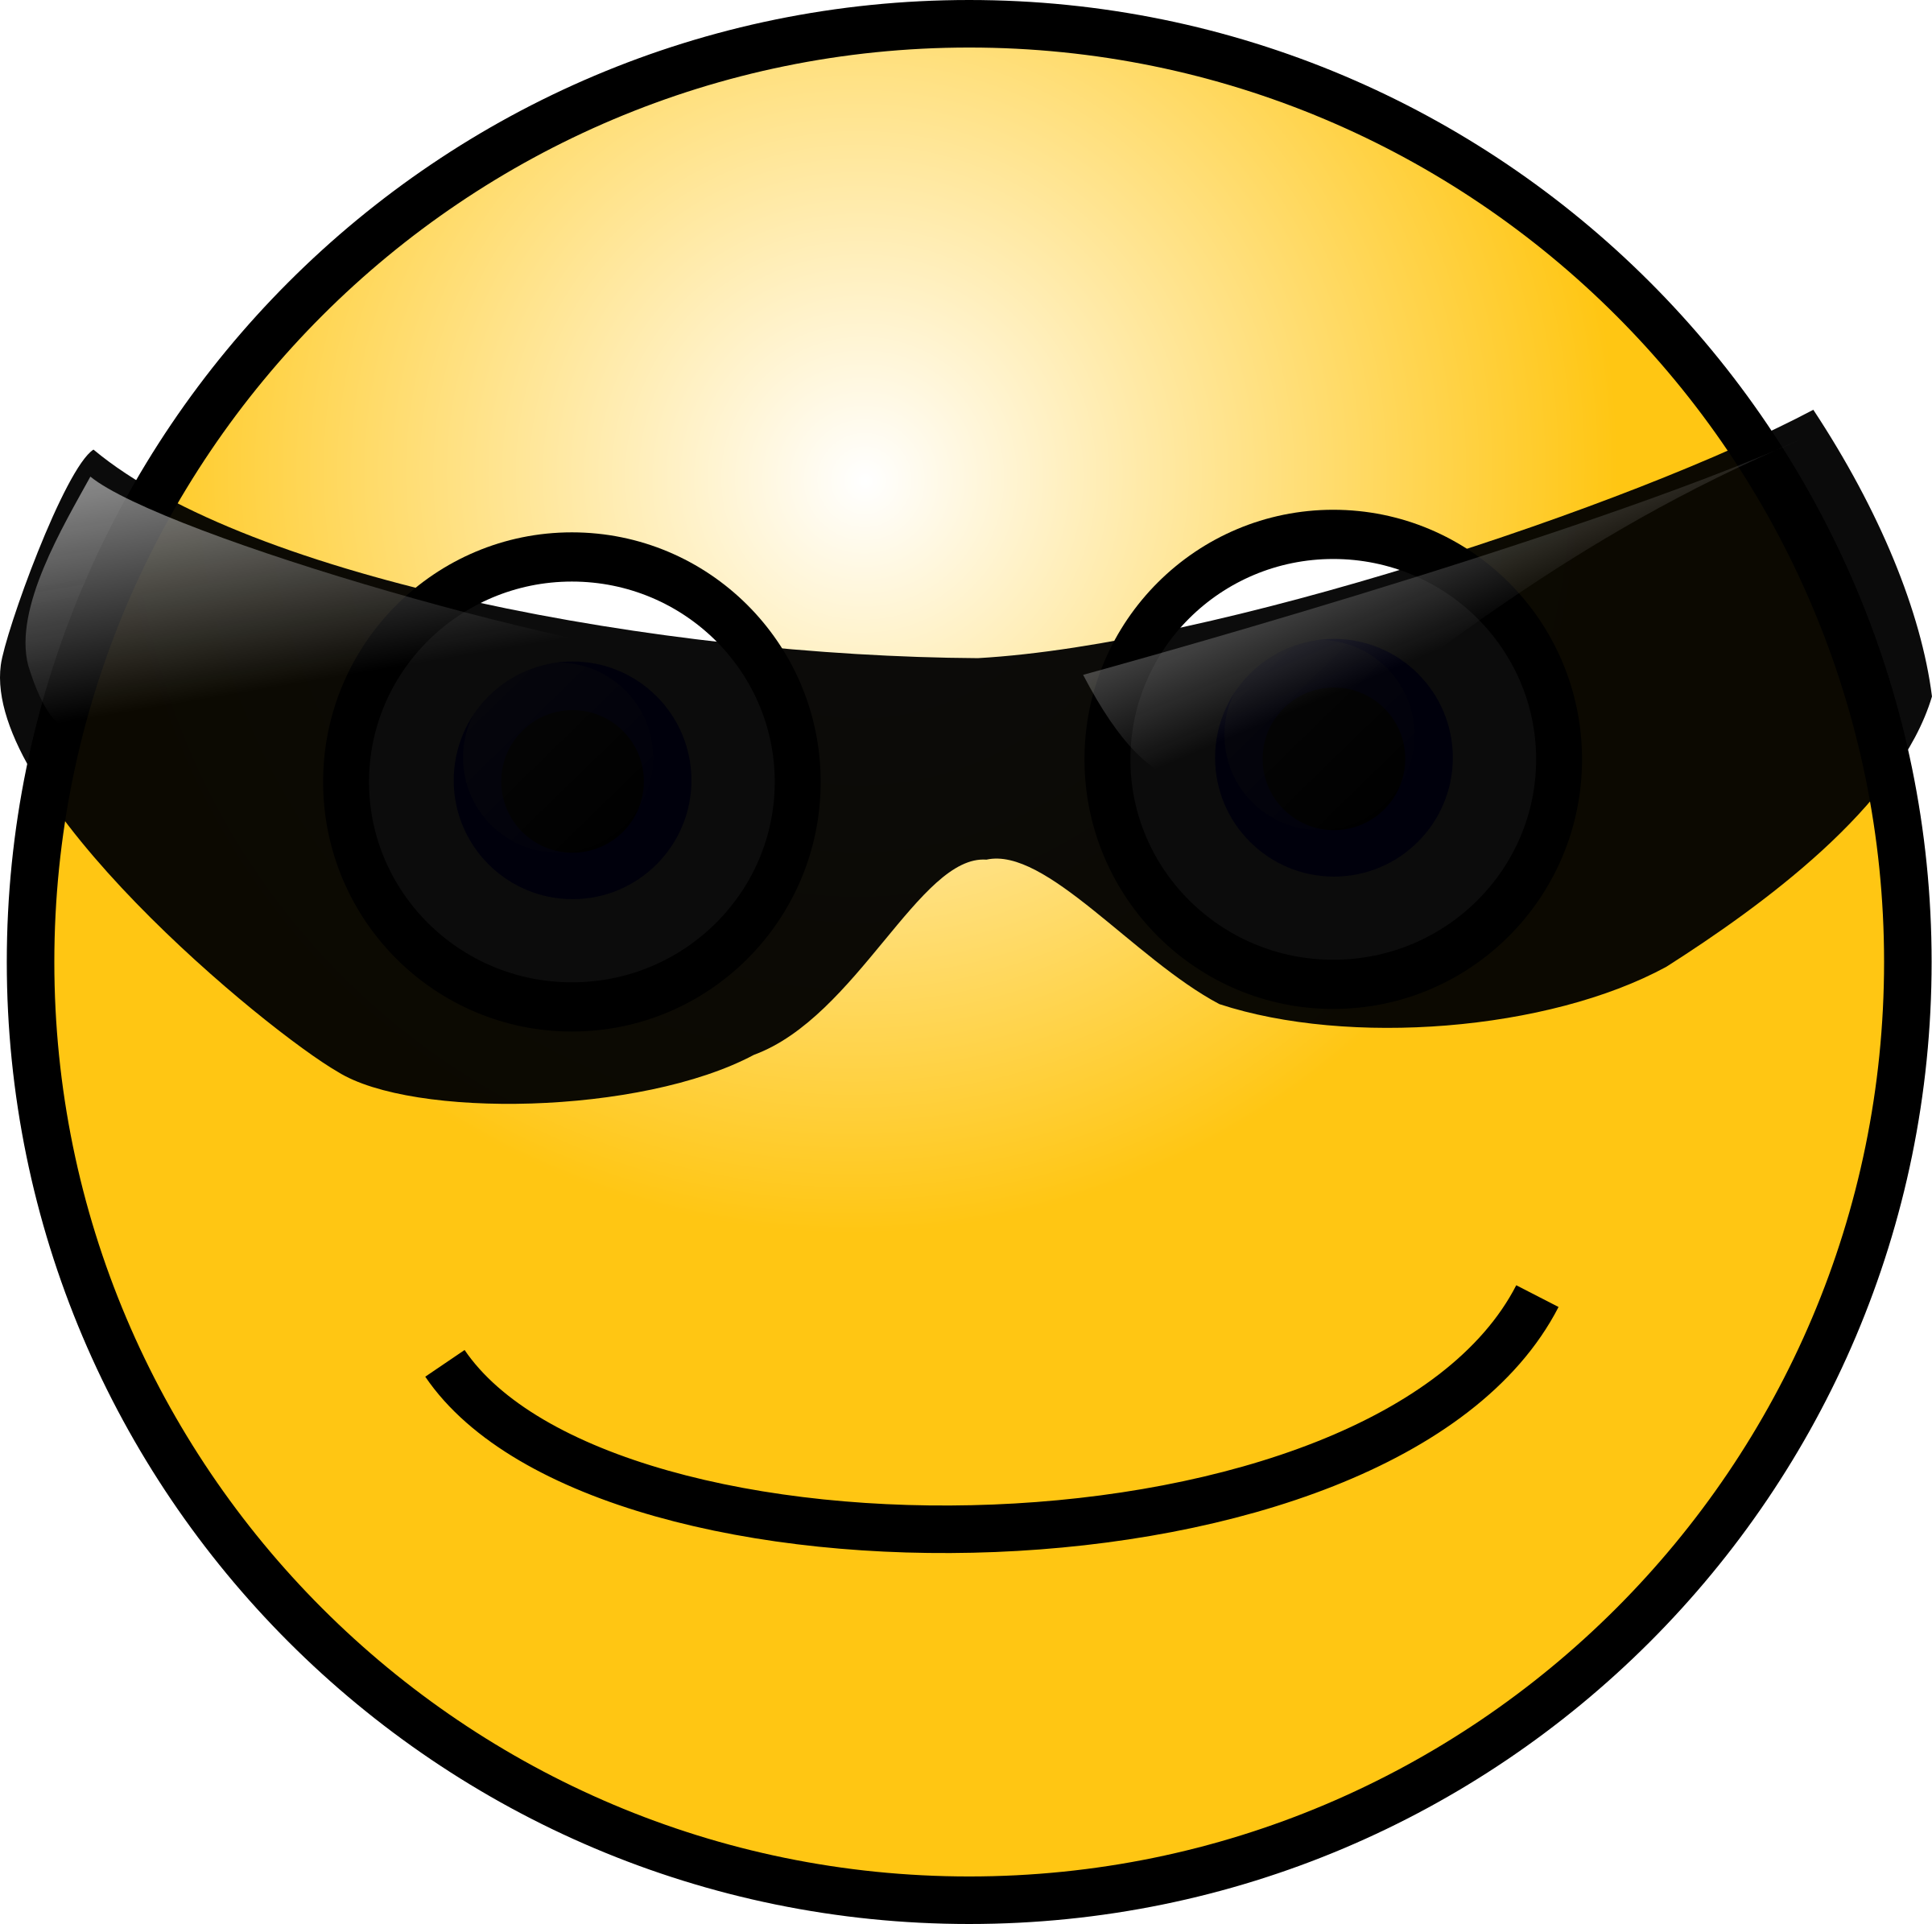 Clipart - Emoticons: Cool face - Cool Smiley Face Clip Art